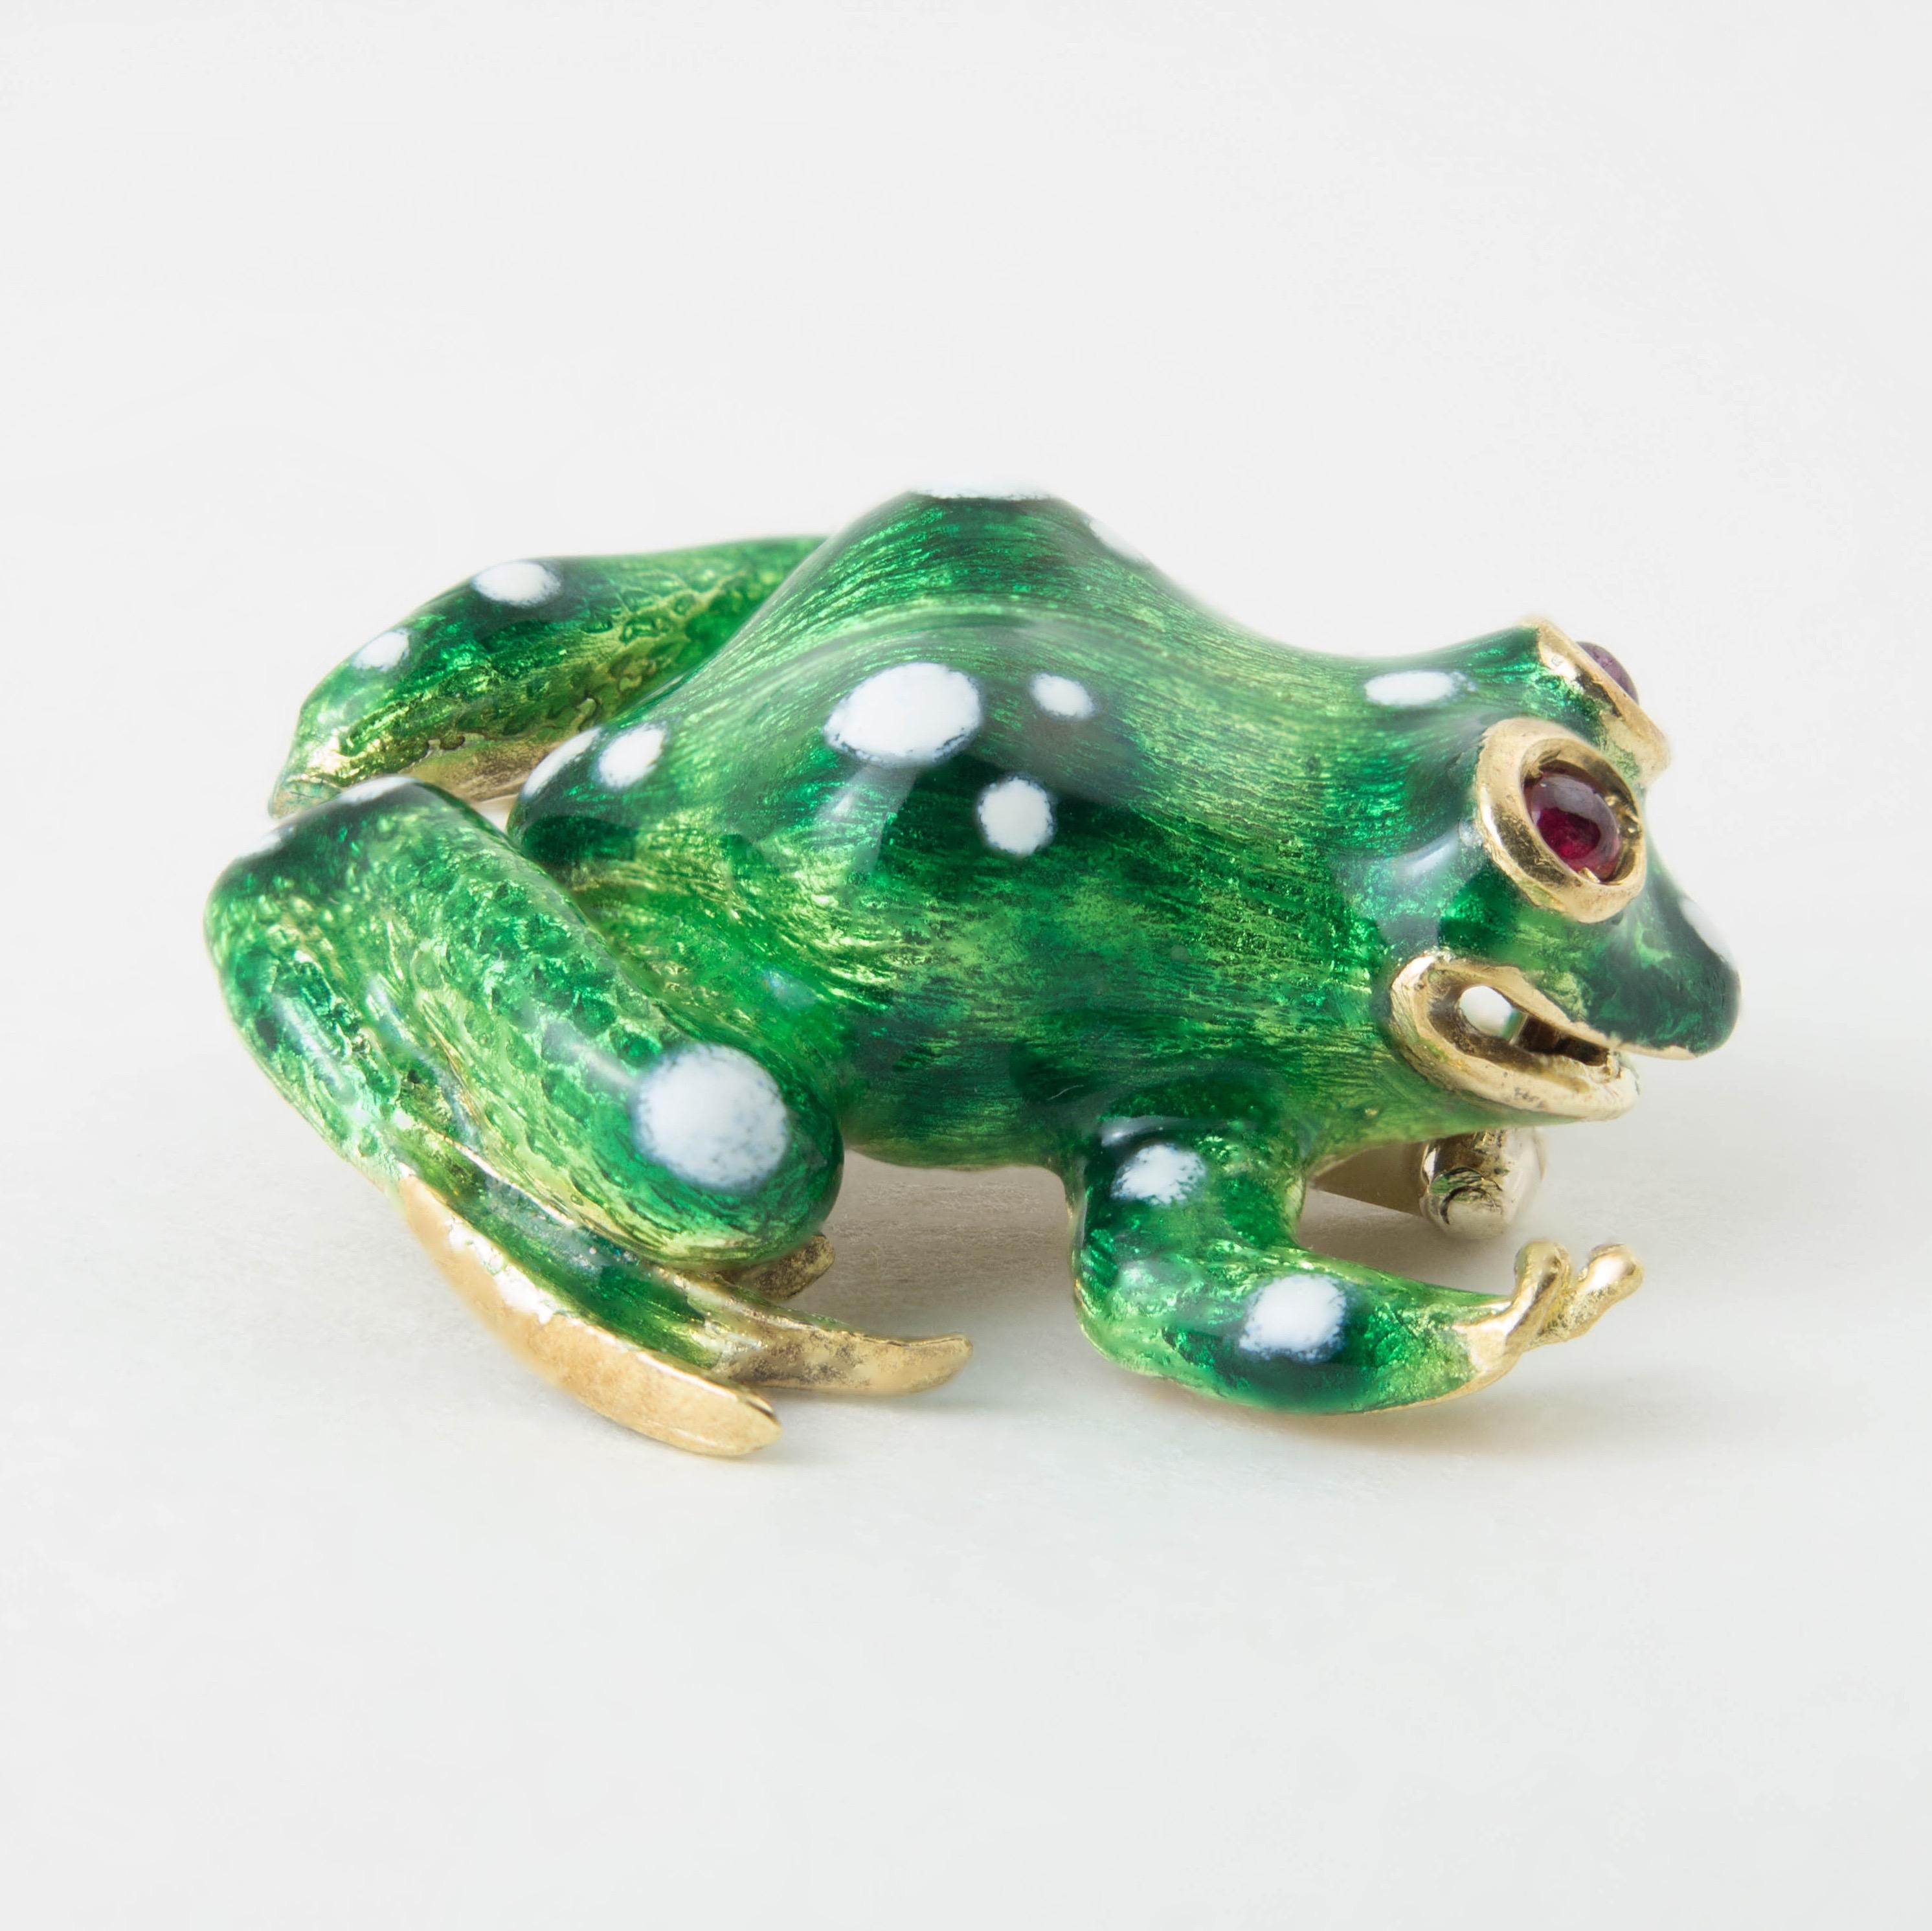 A delightfully charming 18k yellow gold, enamel and ruby frog pin or brooch, late 20th century.

The charming frog crafted in 18k yellow gold with a green enamel body with white enamel spots, and ruby cabochon eyes. 

Marked 